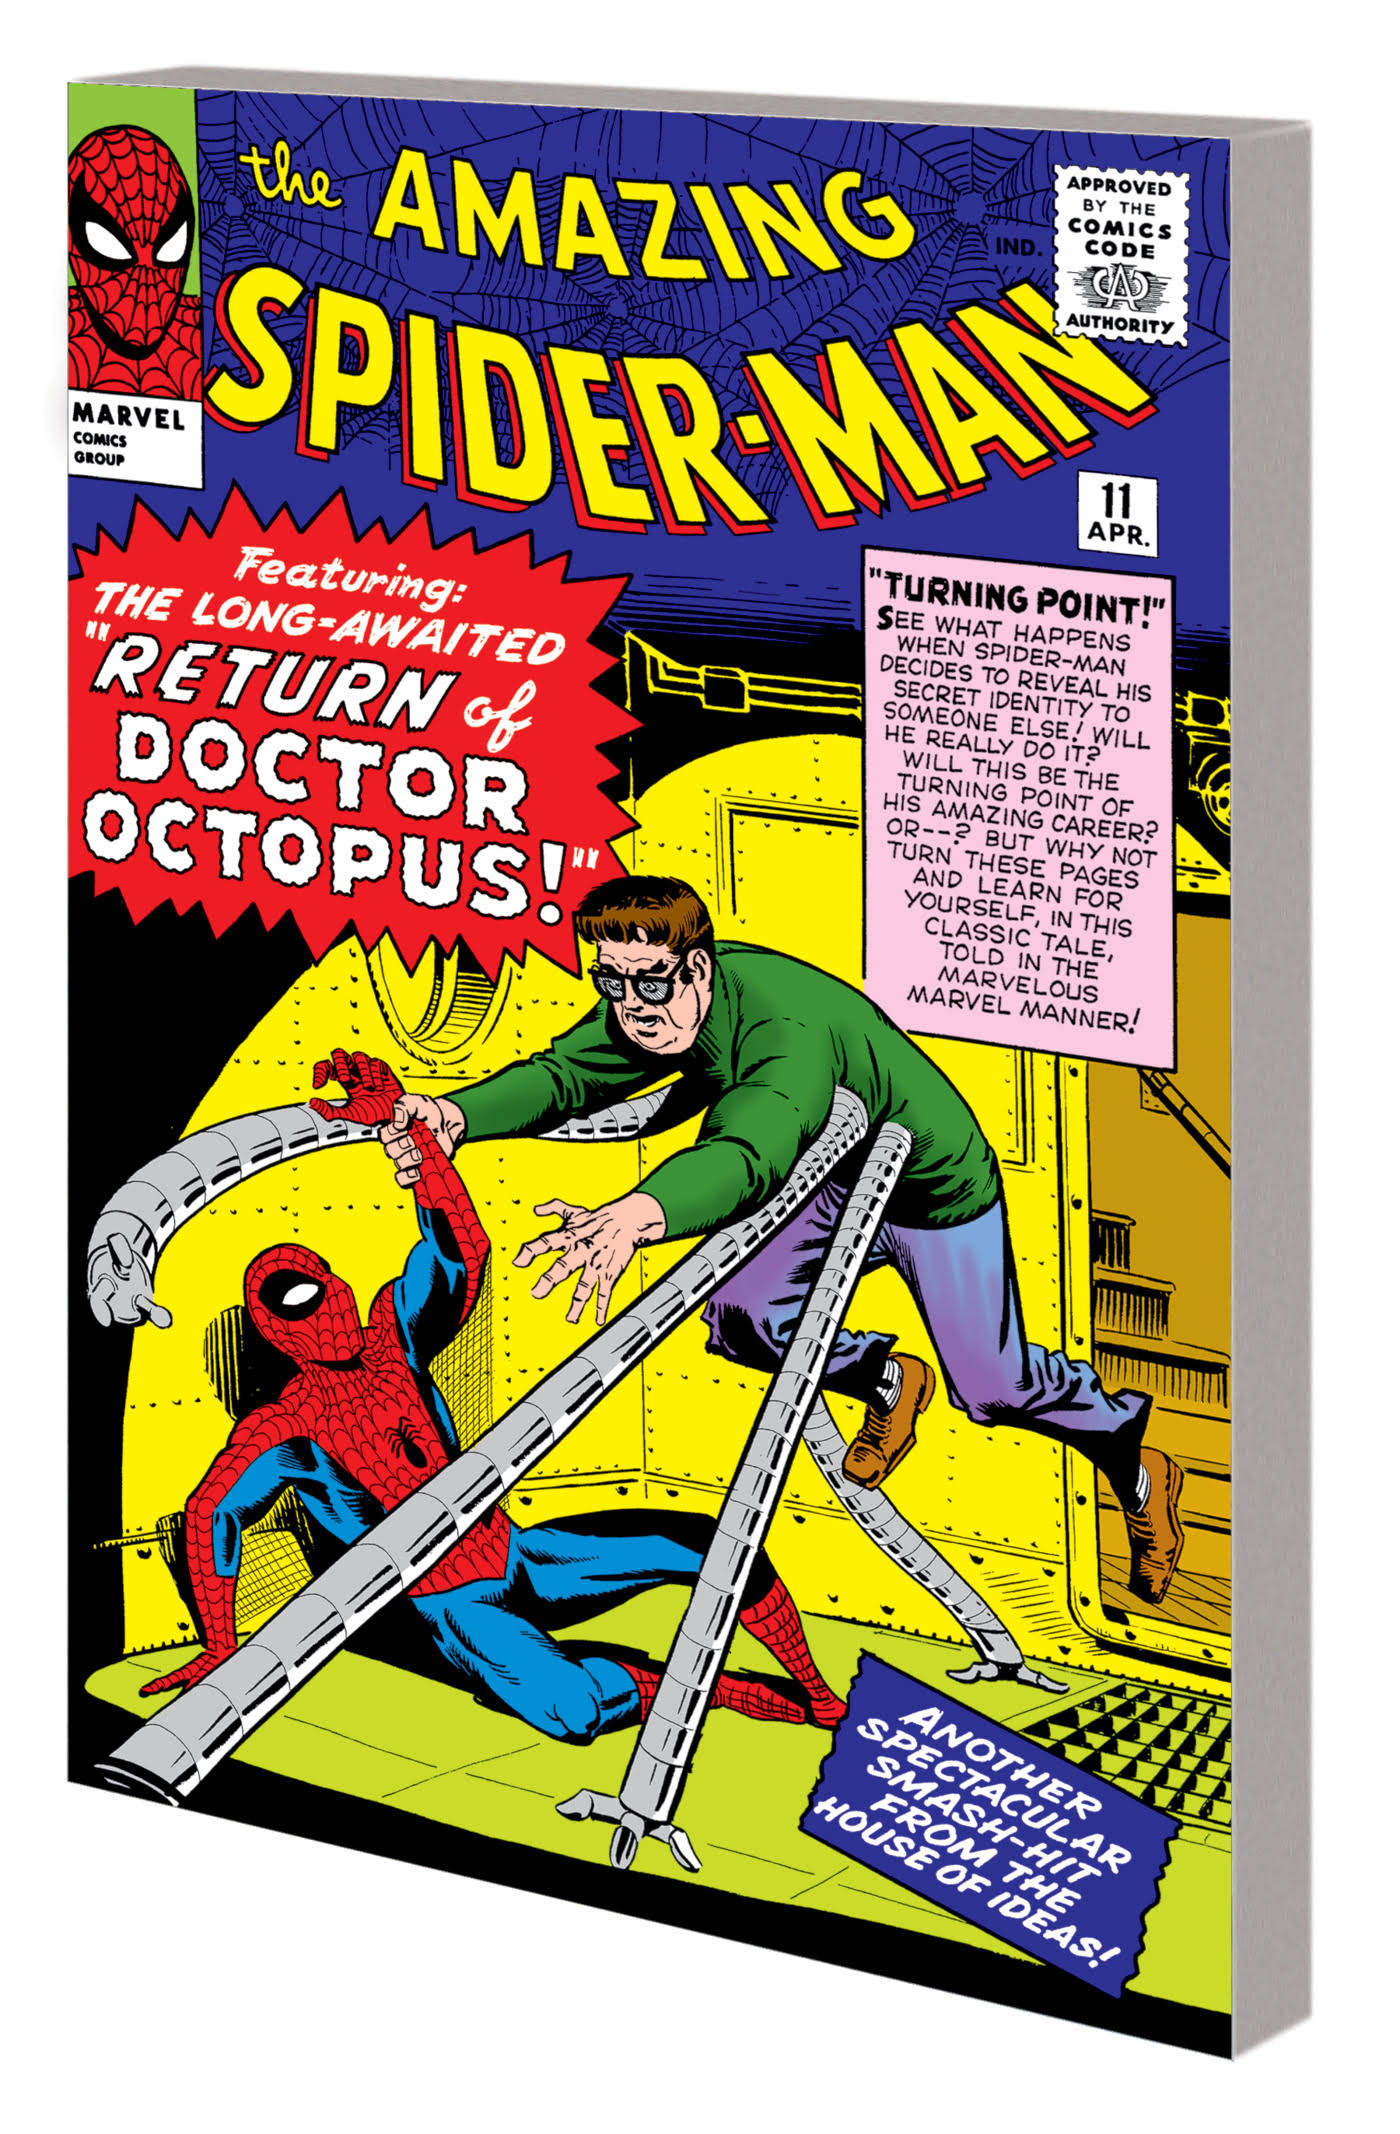 The Amazing Spider-Man: Collecting The Amazing Spider-Man Nos. 11-19 & Annual No. 1 [Book]